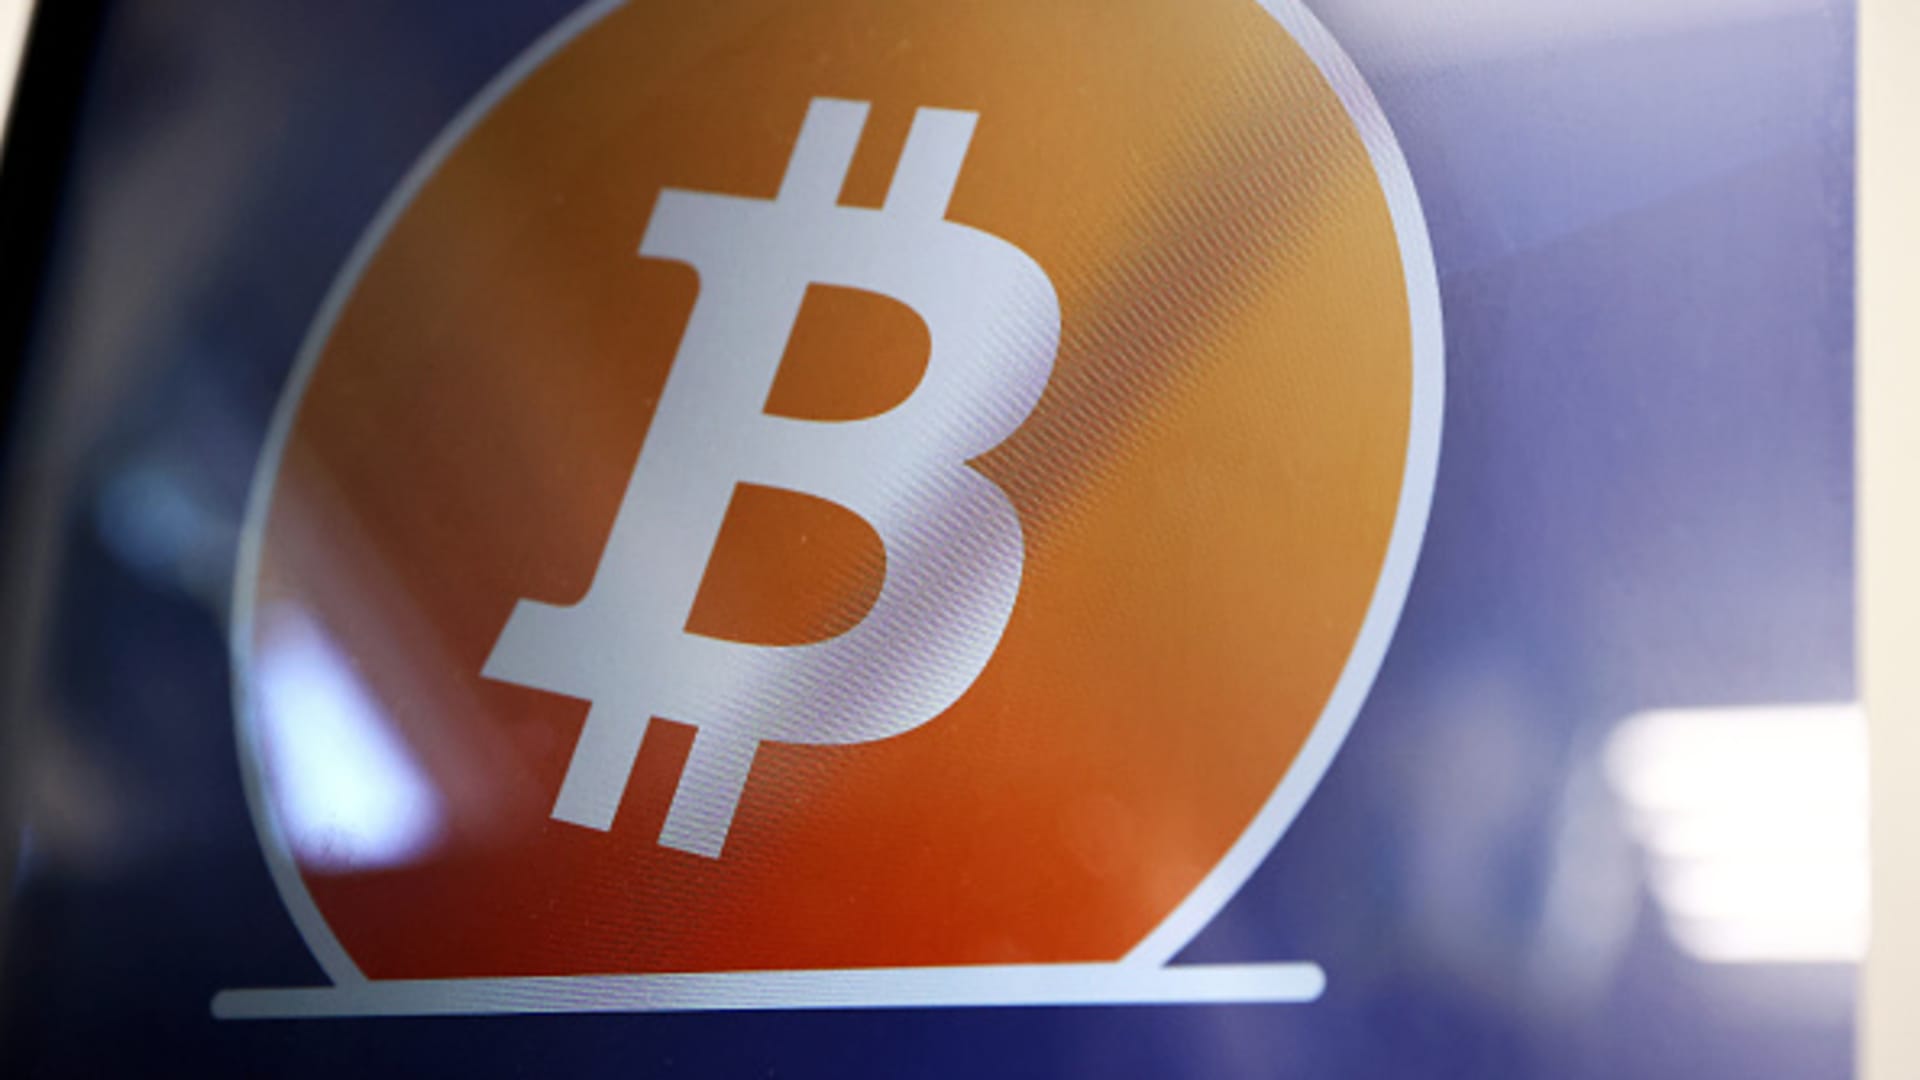 Bitcoin is little changed after SEC sues Coinbase for acting as an unregistered broker